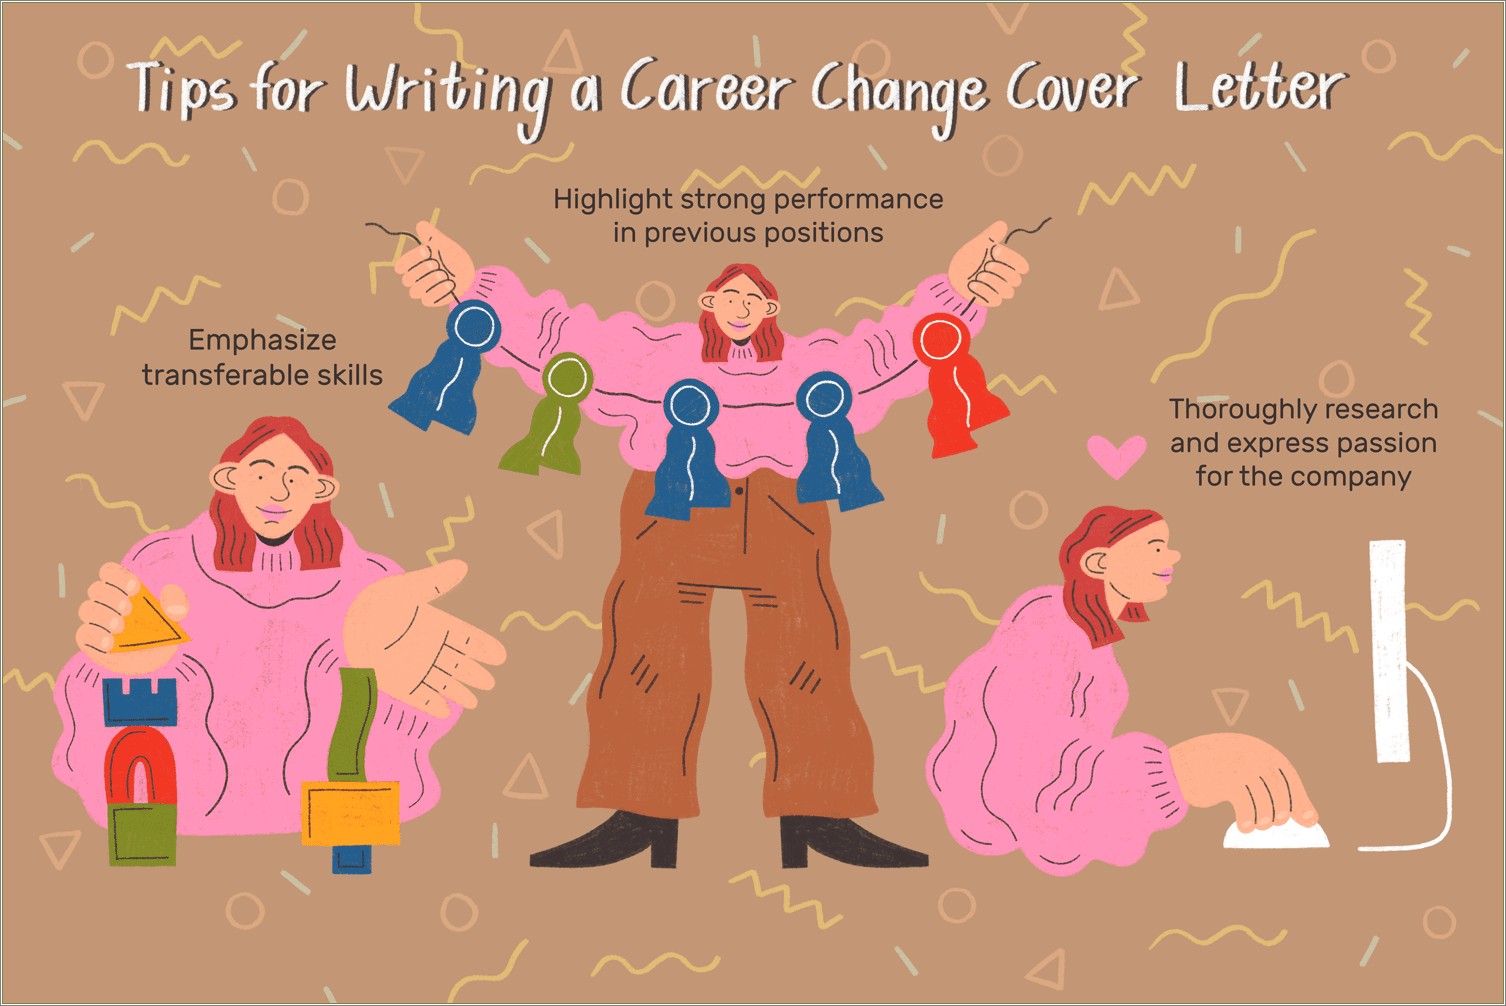 Resume Cover Letter Examples Career Change